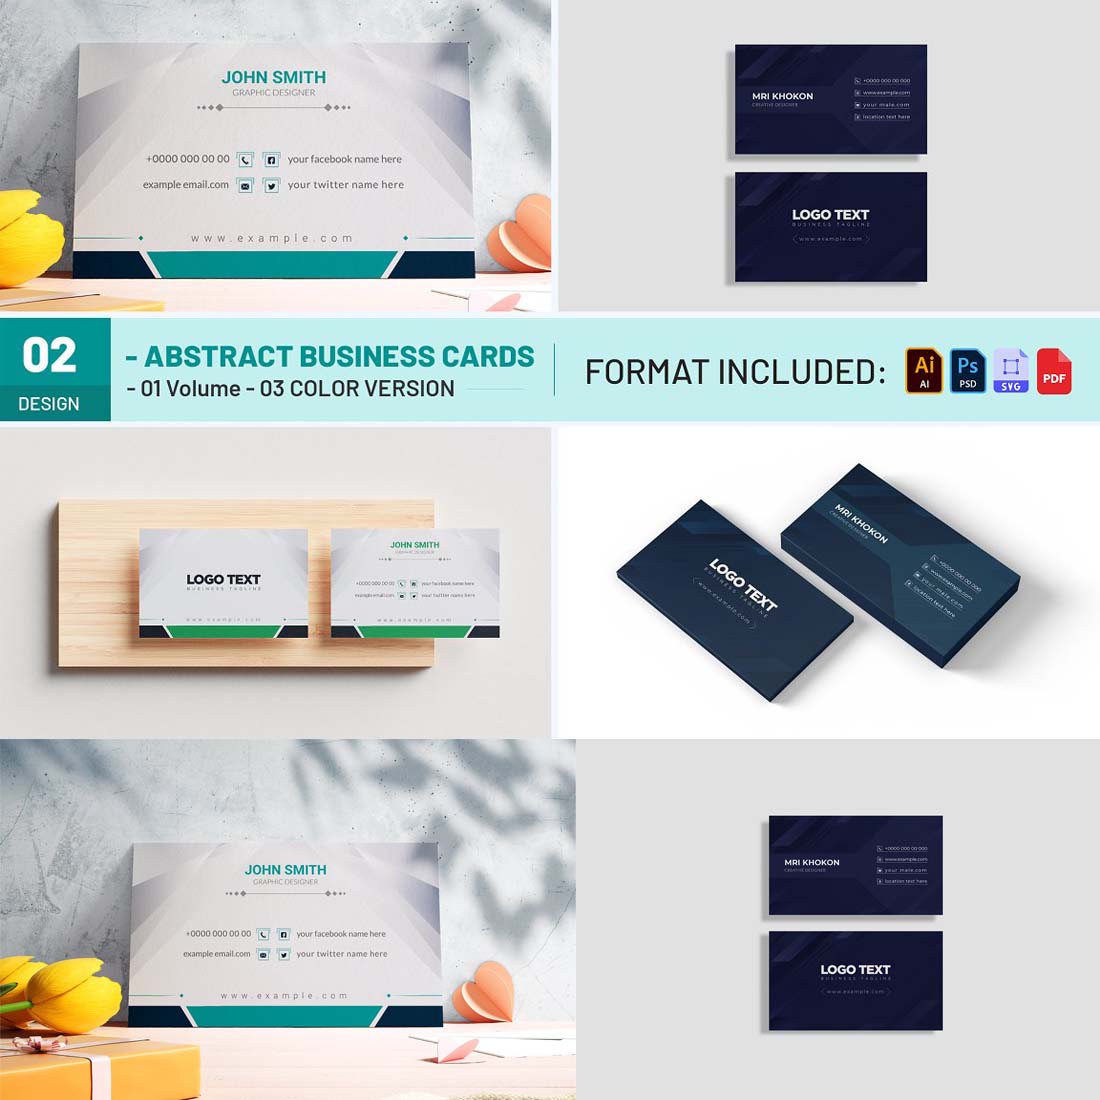 Abstract Business Cards cover image.